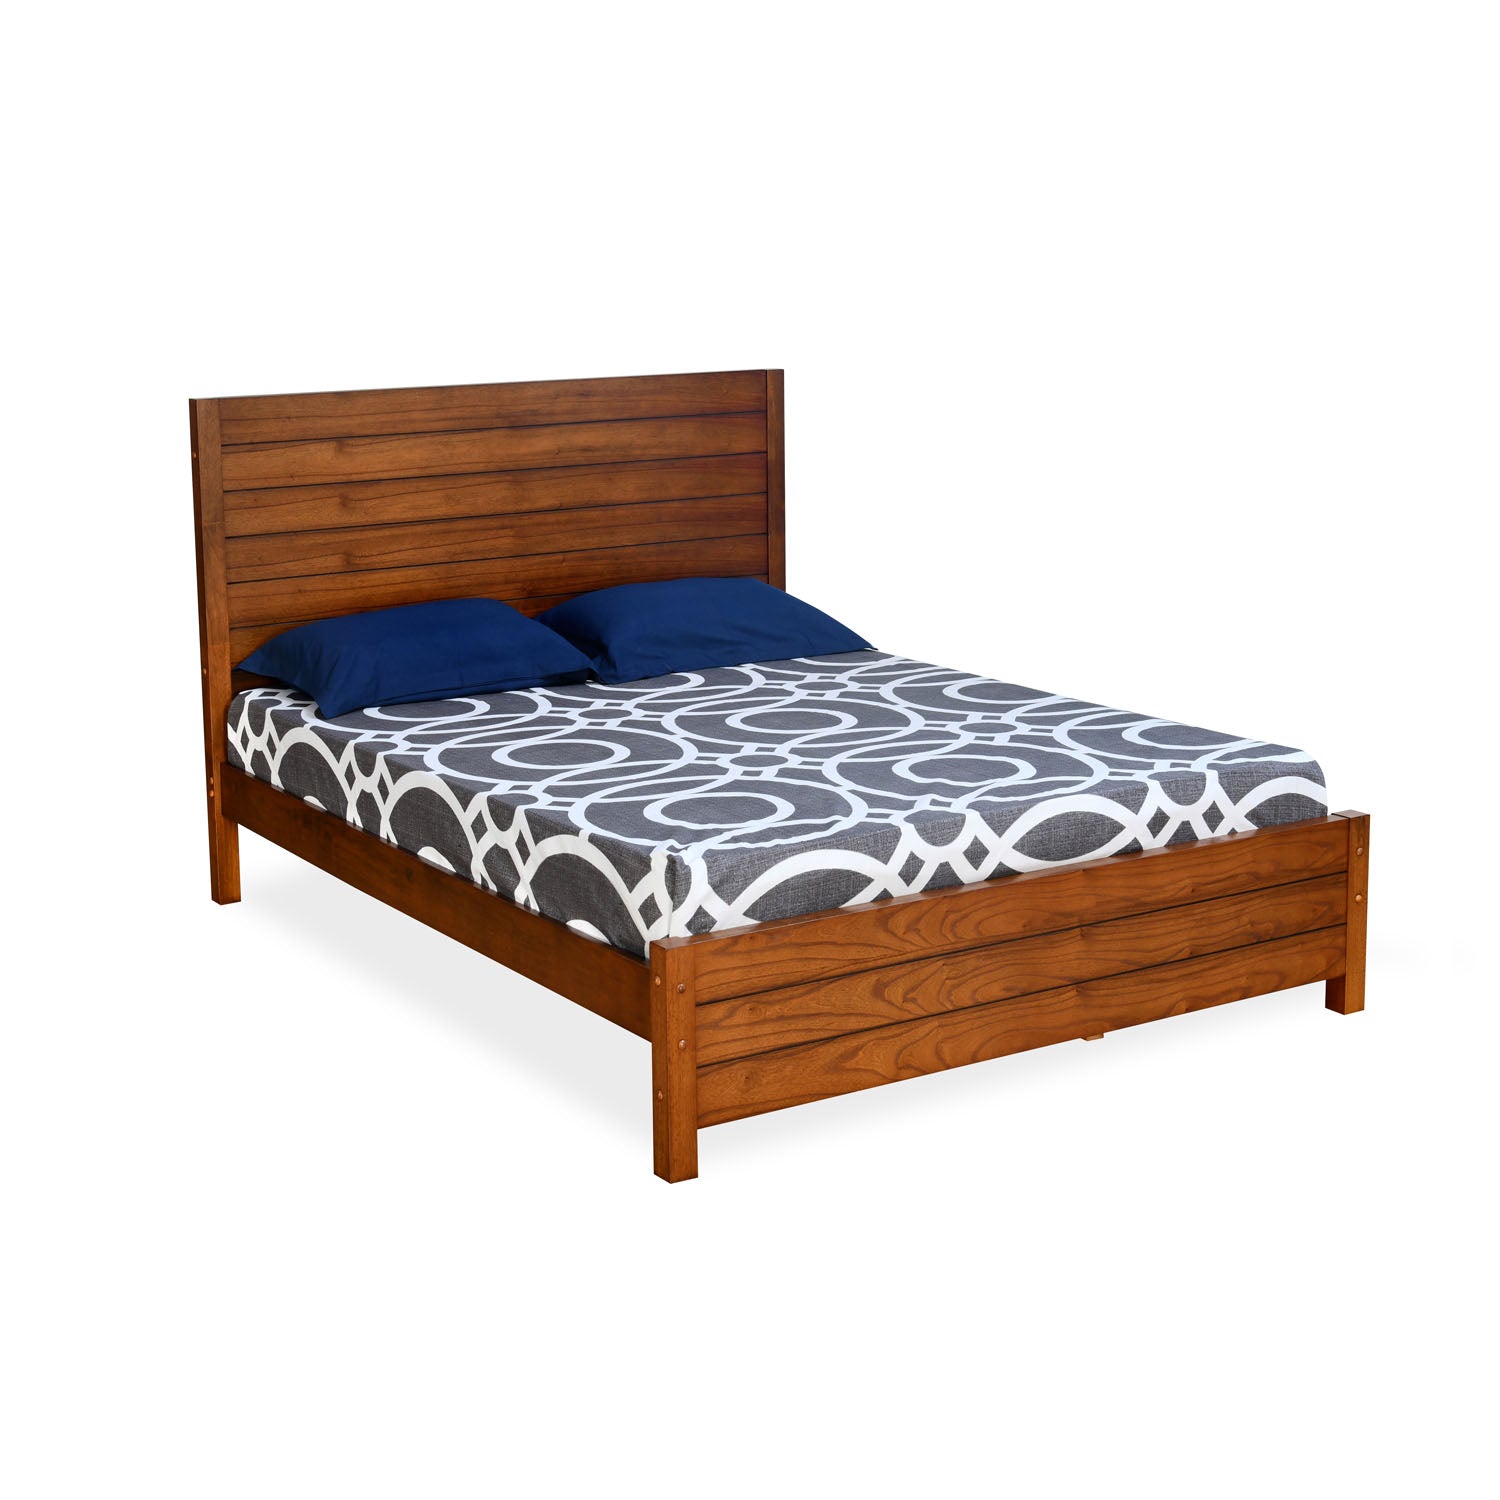 Timberland Solid Wood Queen Bed Without Storage (Dark Walnut)